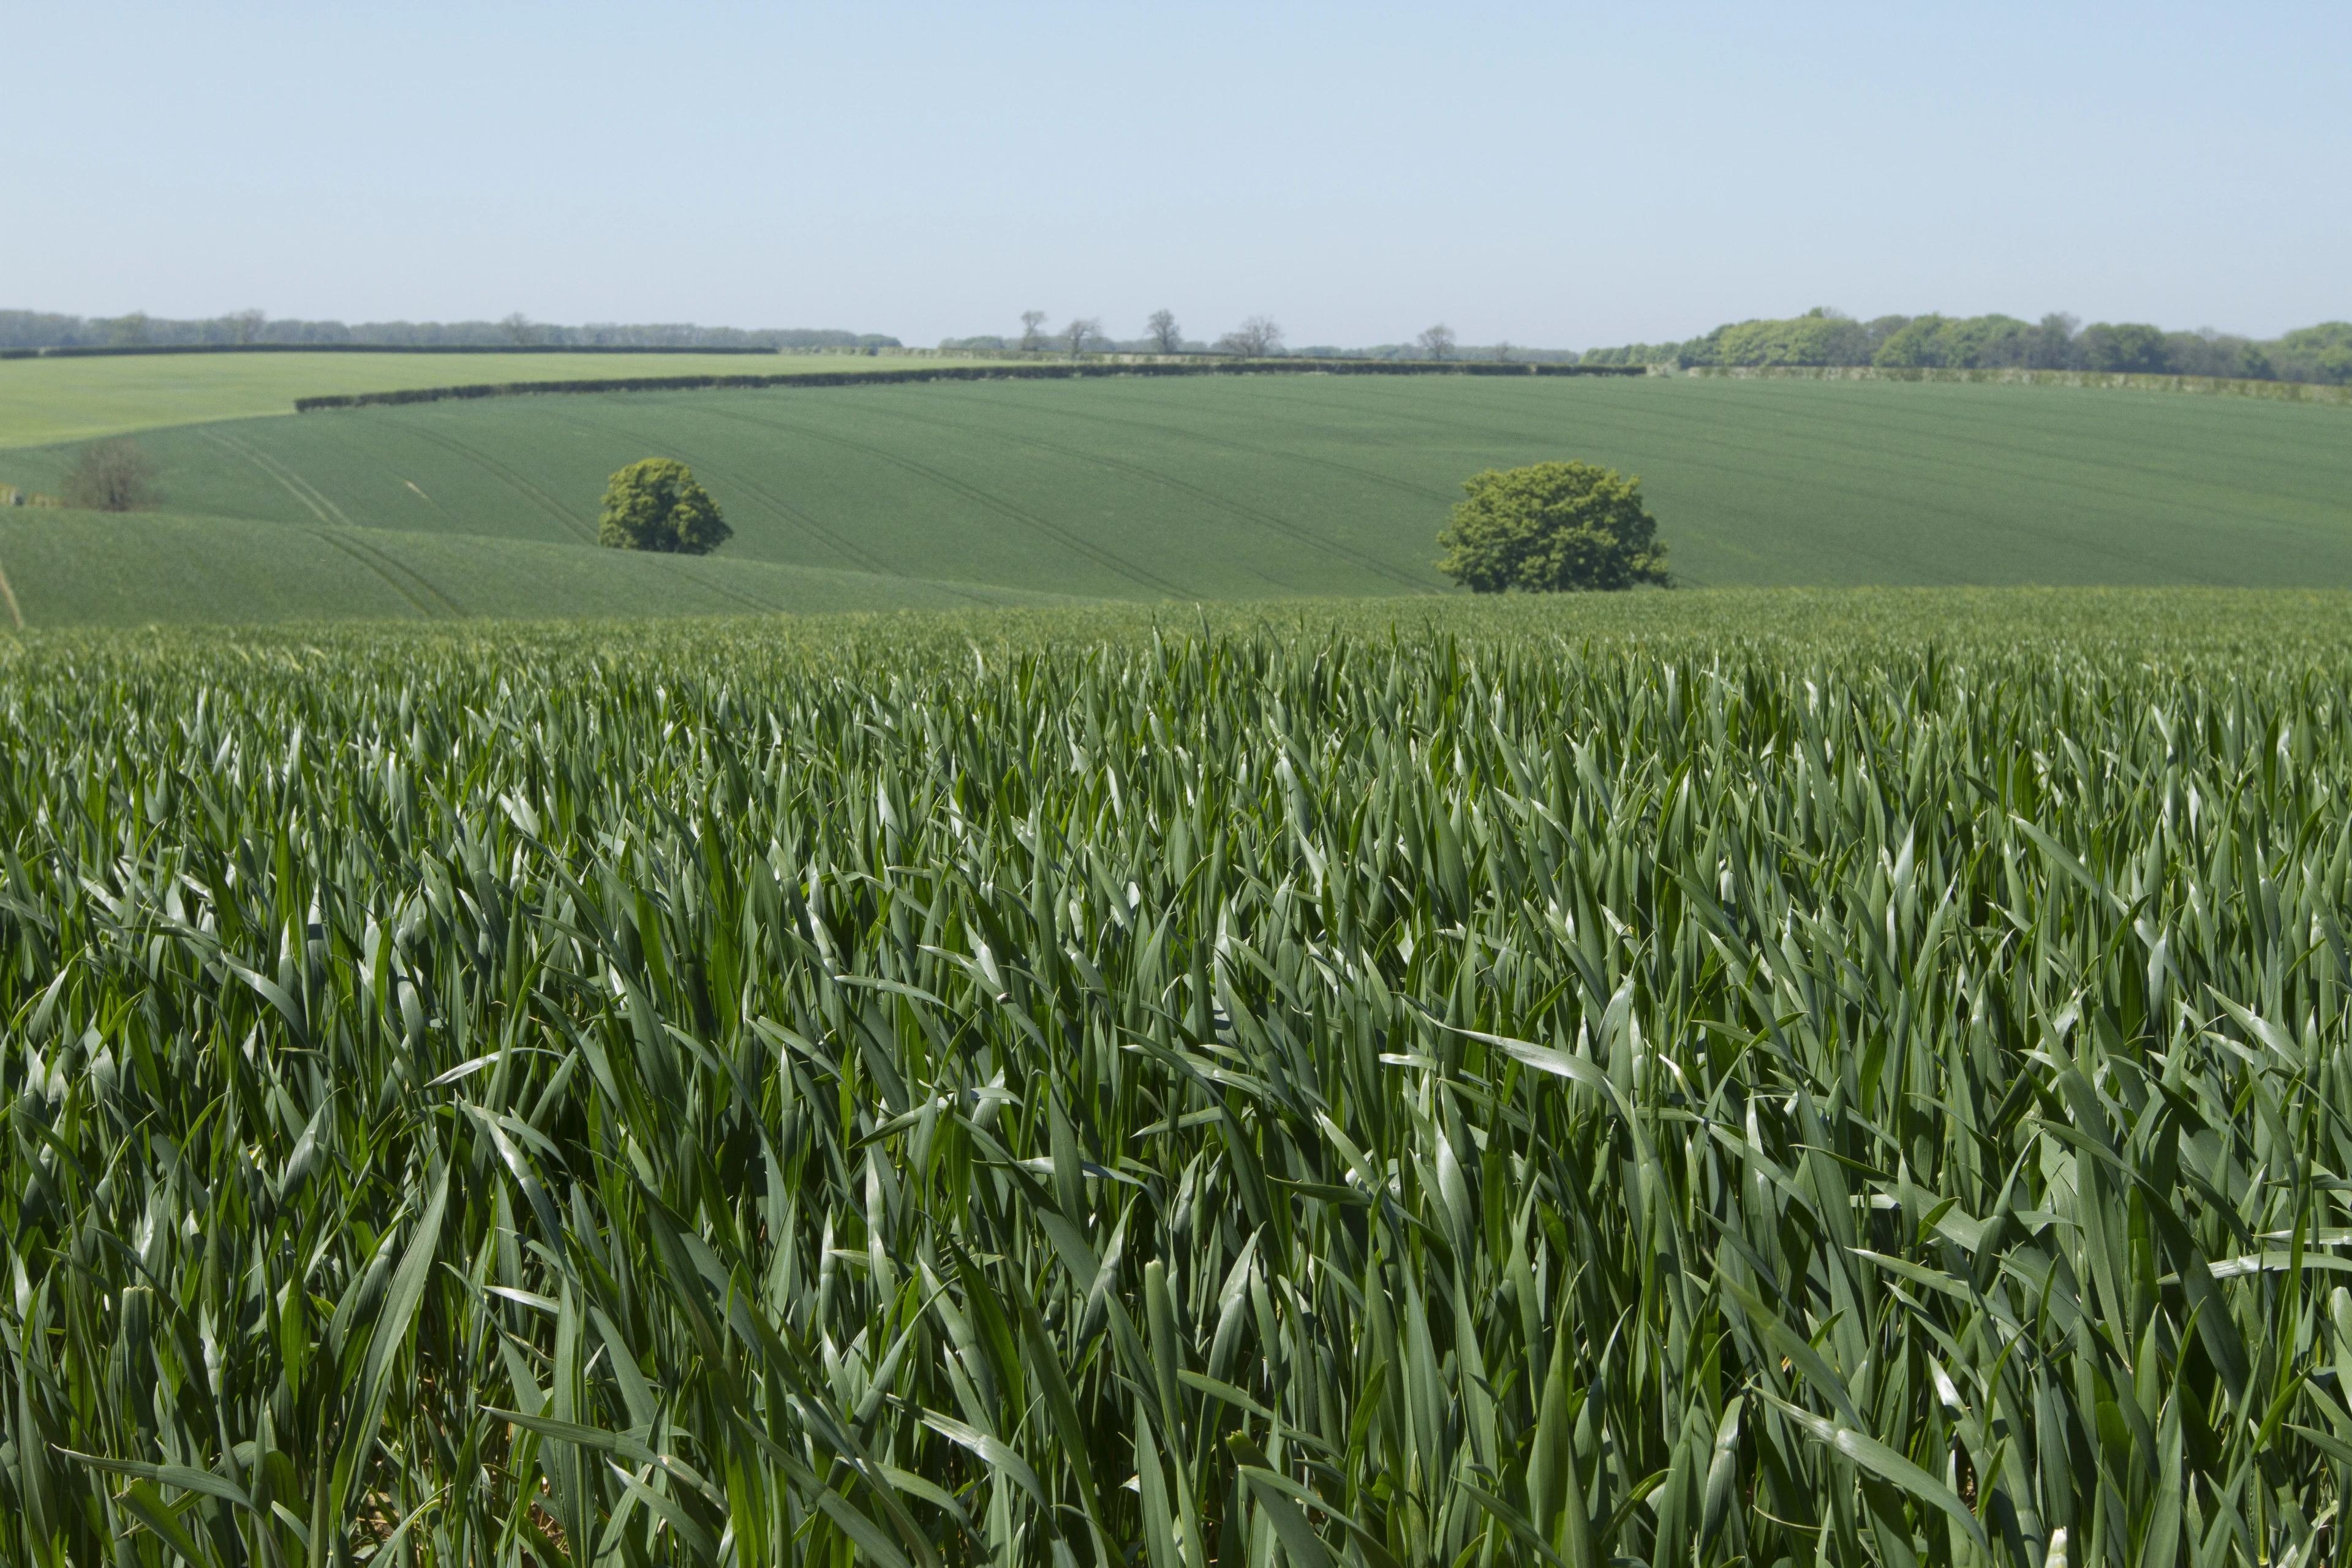 Large green crop field with a few trees in the background